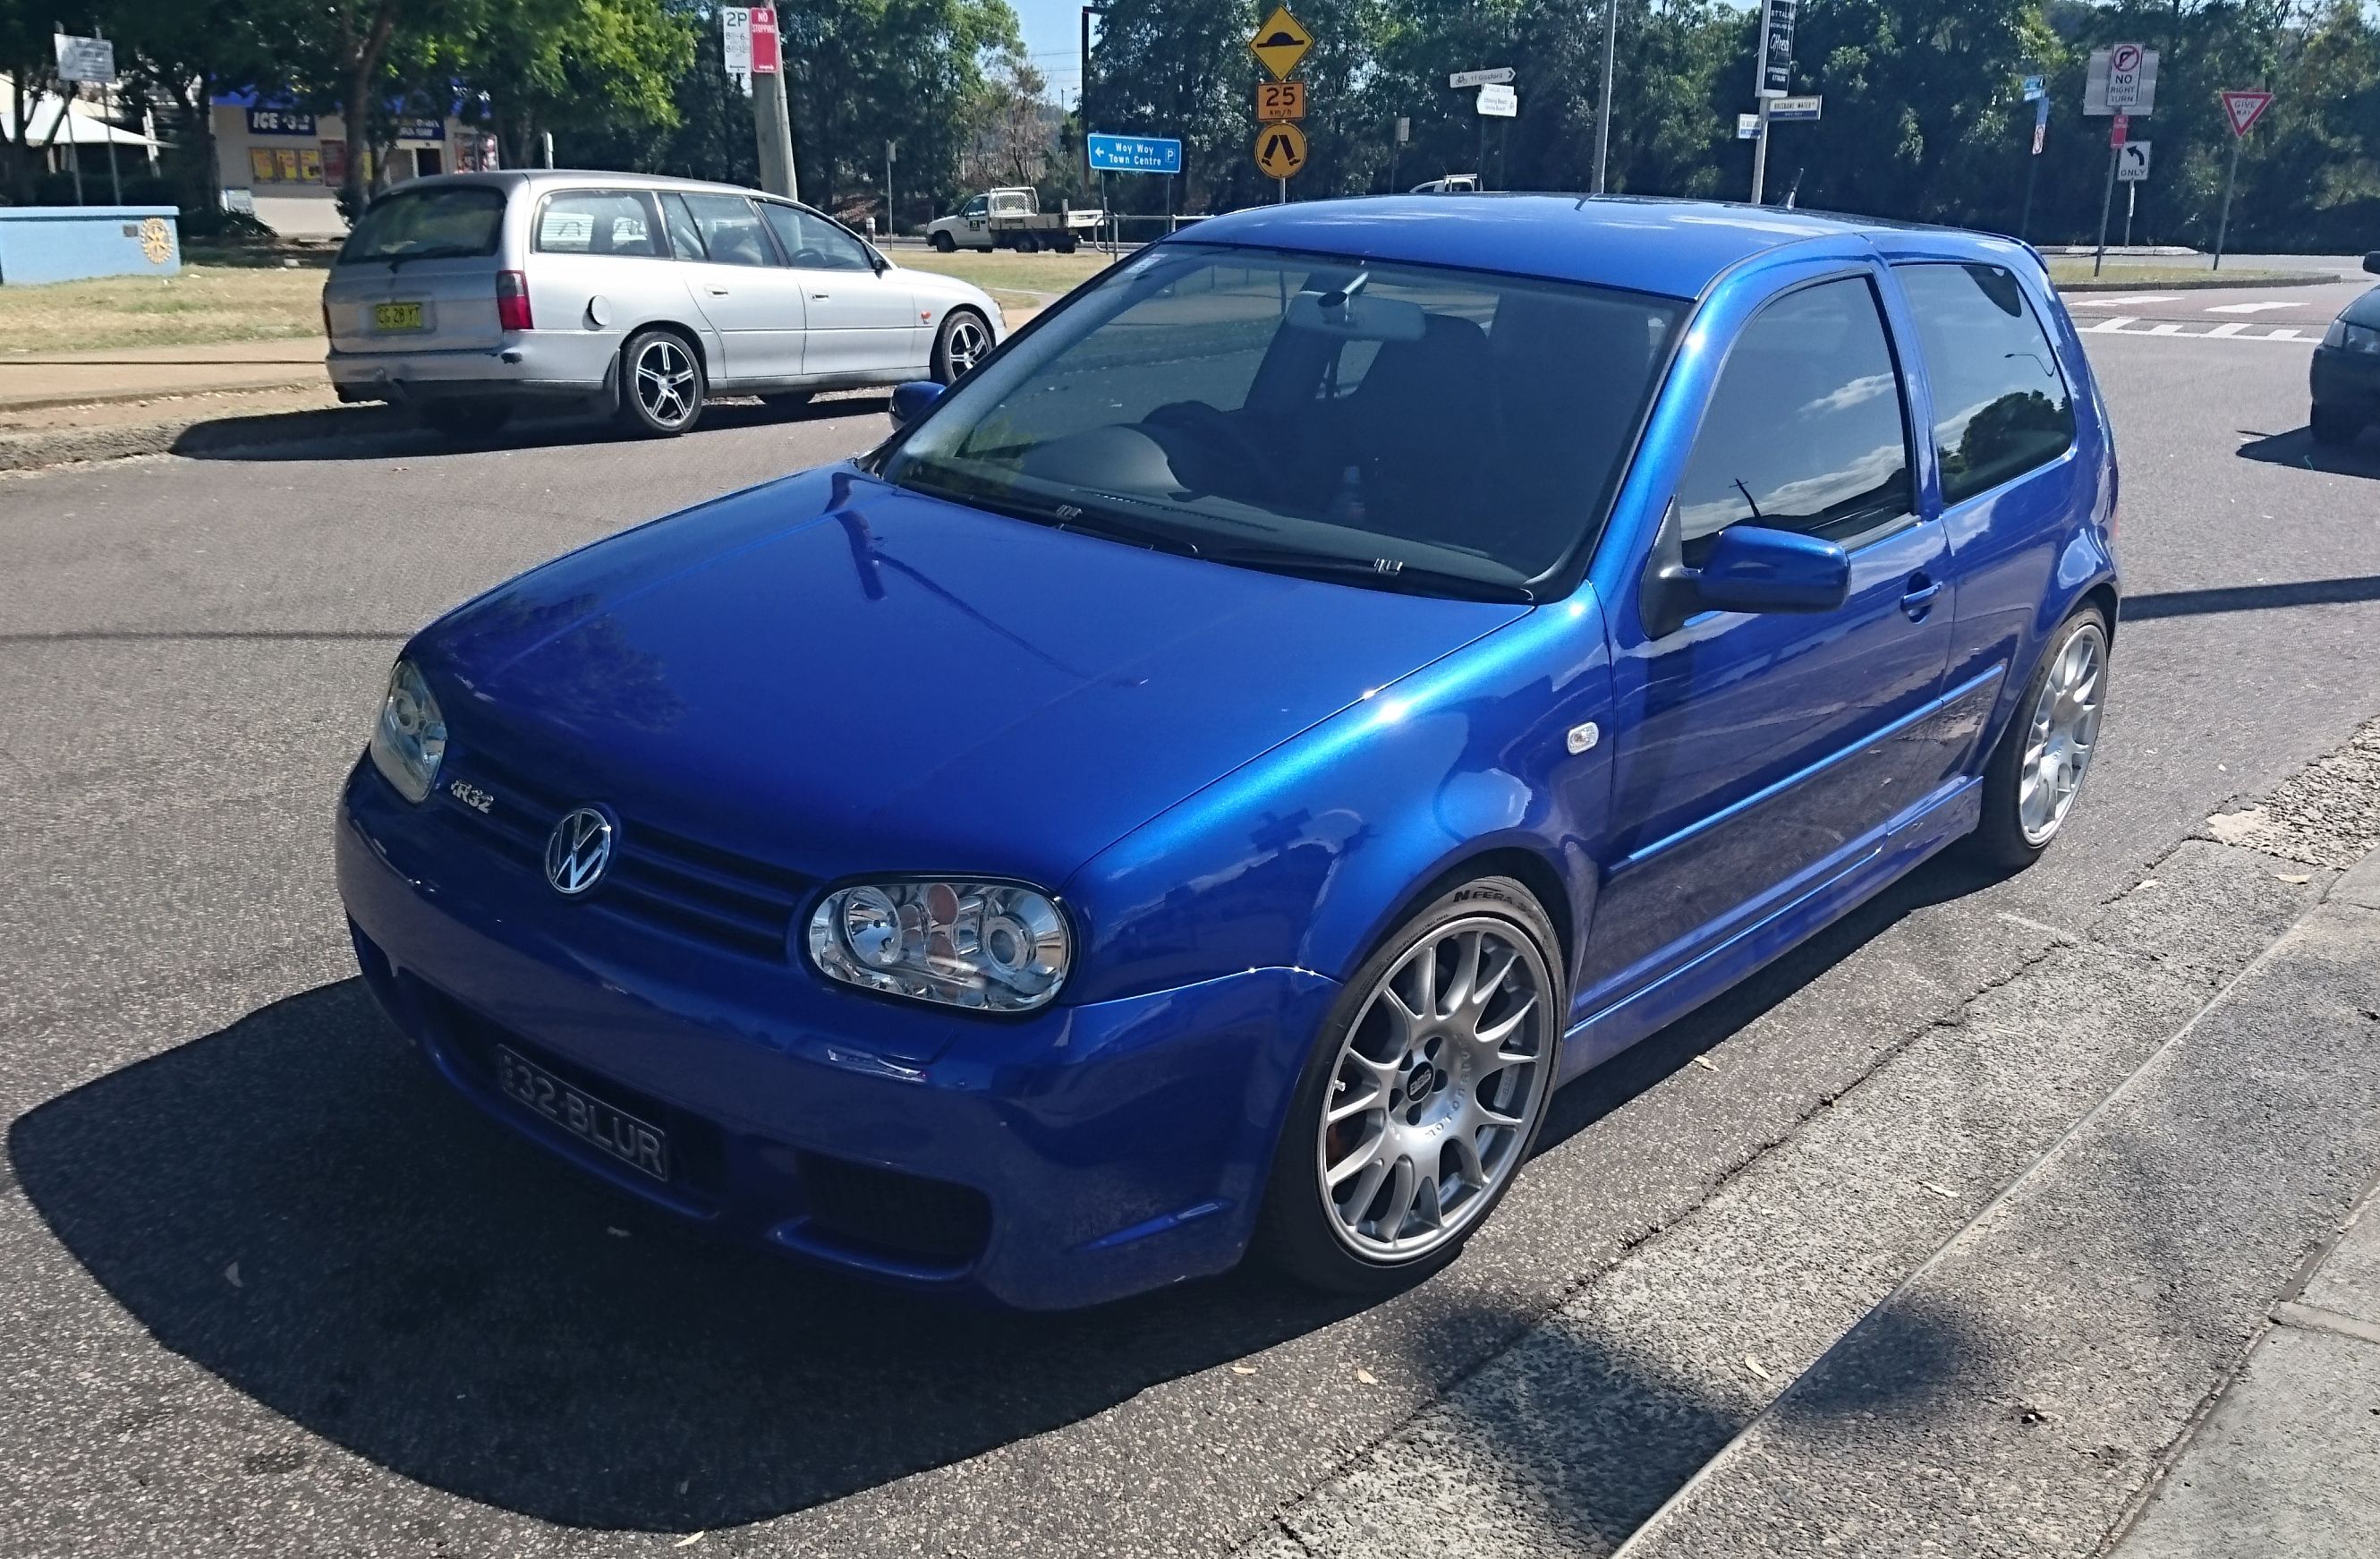 Pearl Blue R32 Parked